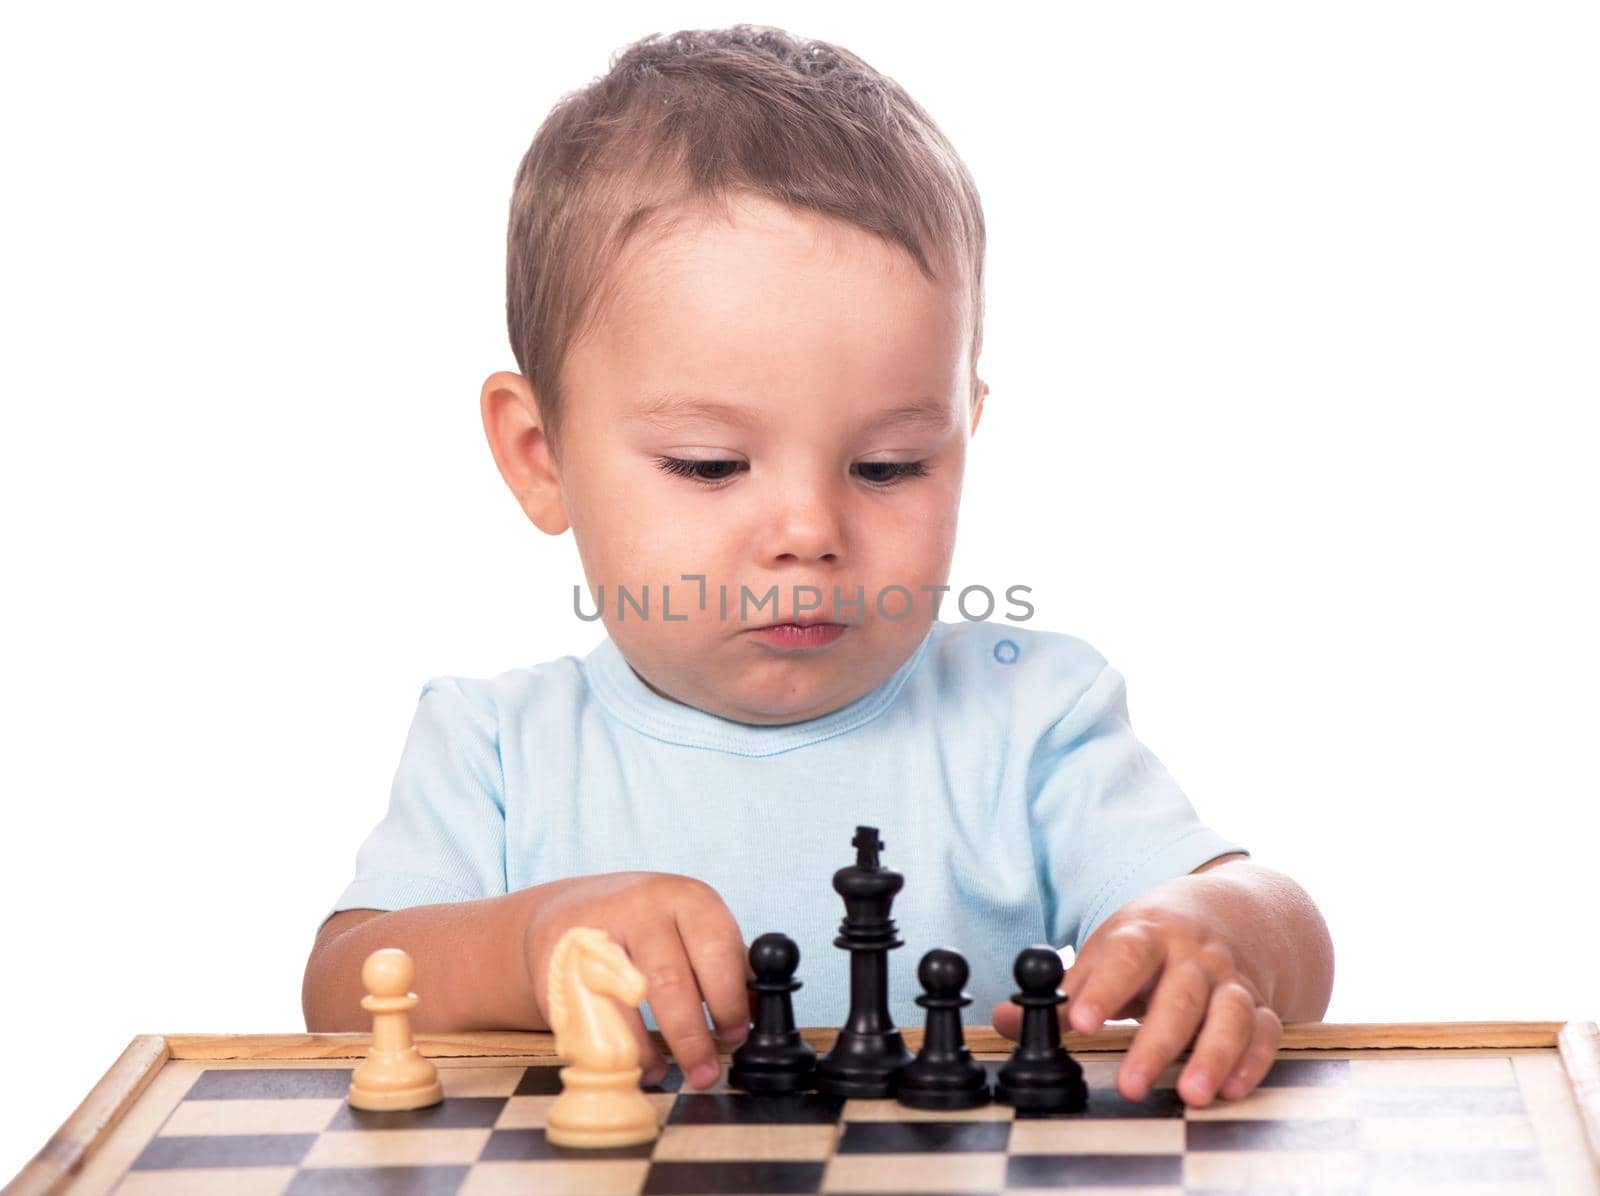 little boy staring at the chess pieces isolated on white background by aprilphoto